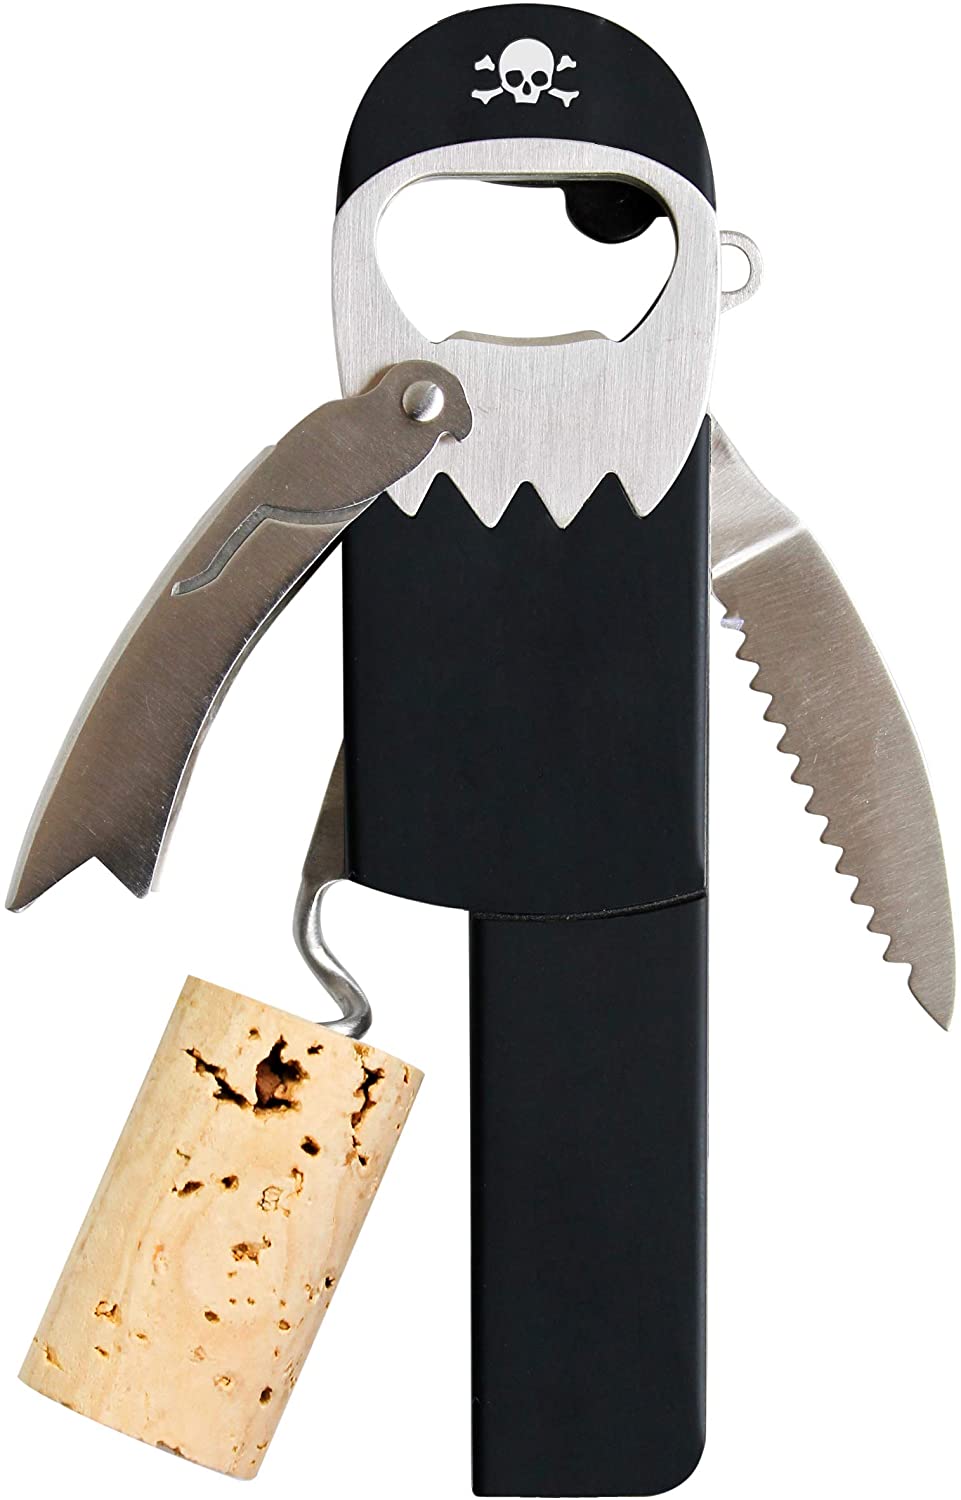 Legless Pirate Wine and Beer Bottle Opener